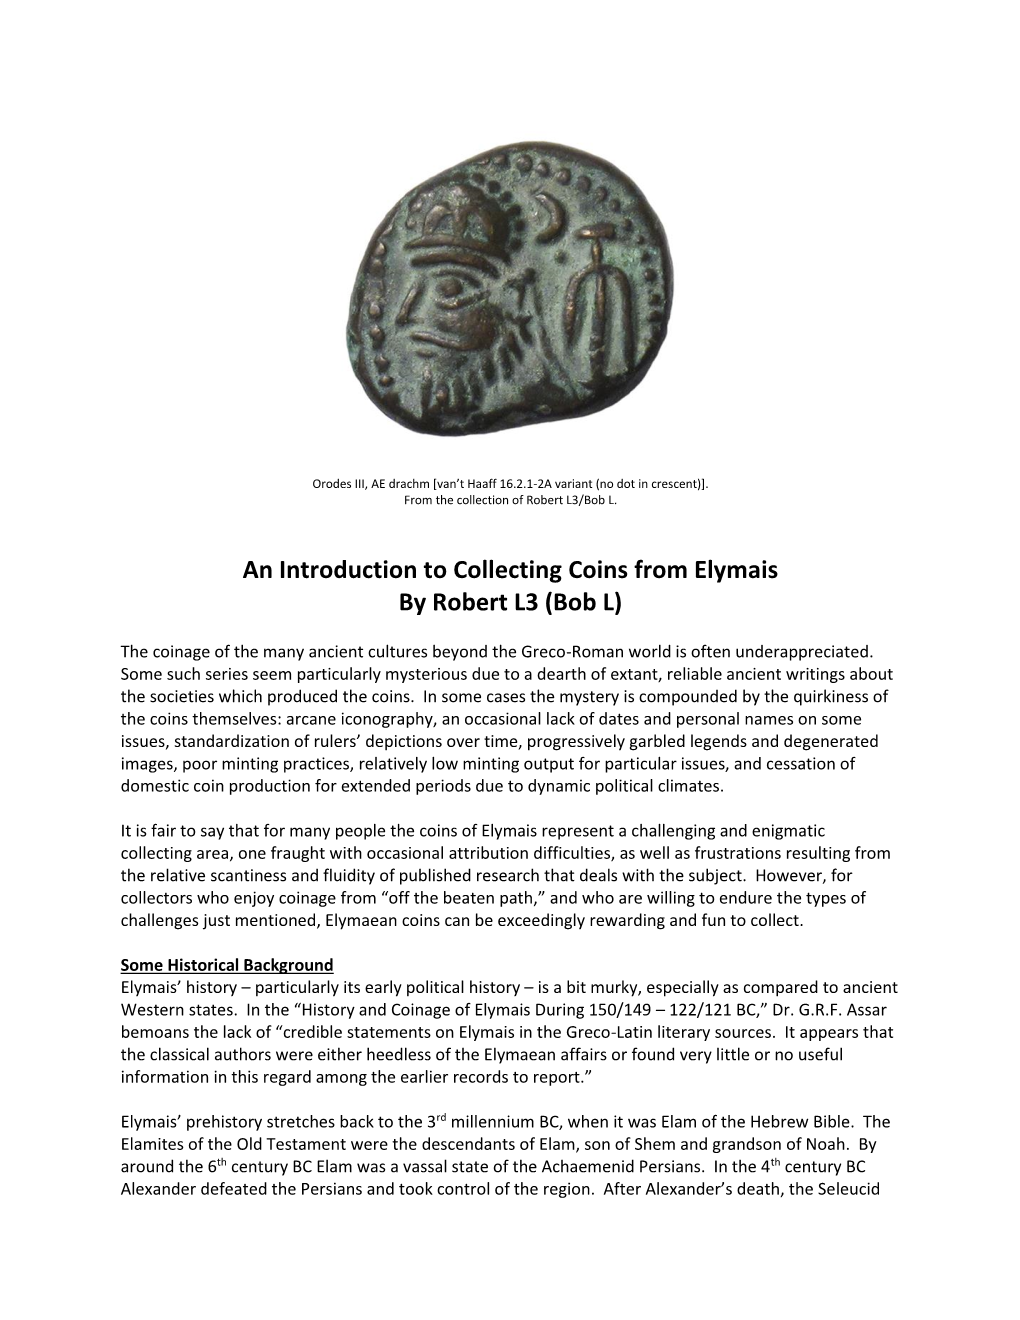 An Introduction to Collecting Coins from Elymais by Robert L3 (Bob L)